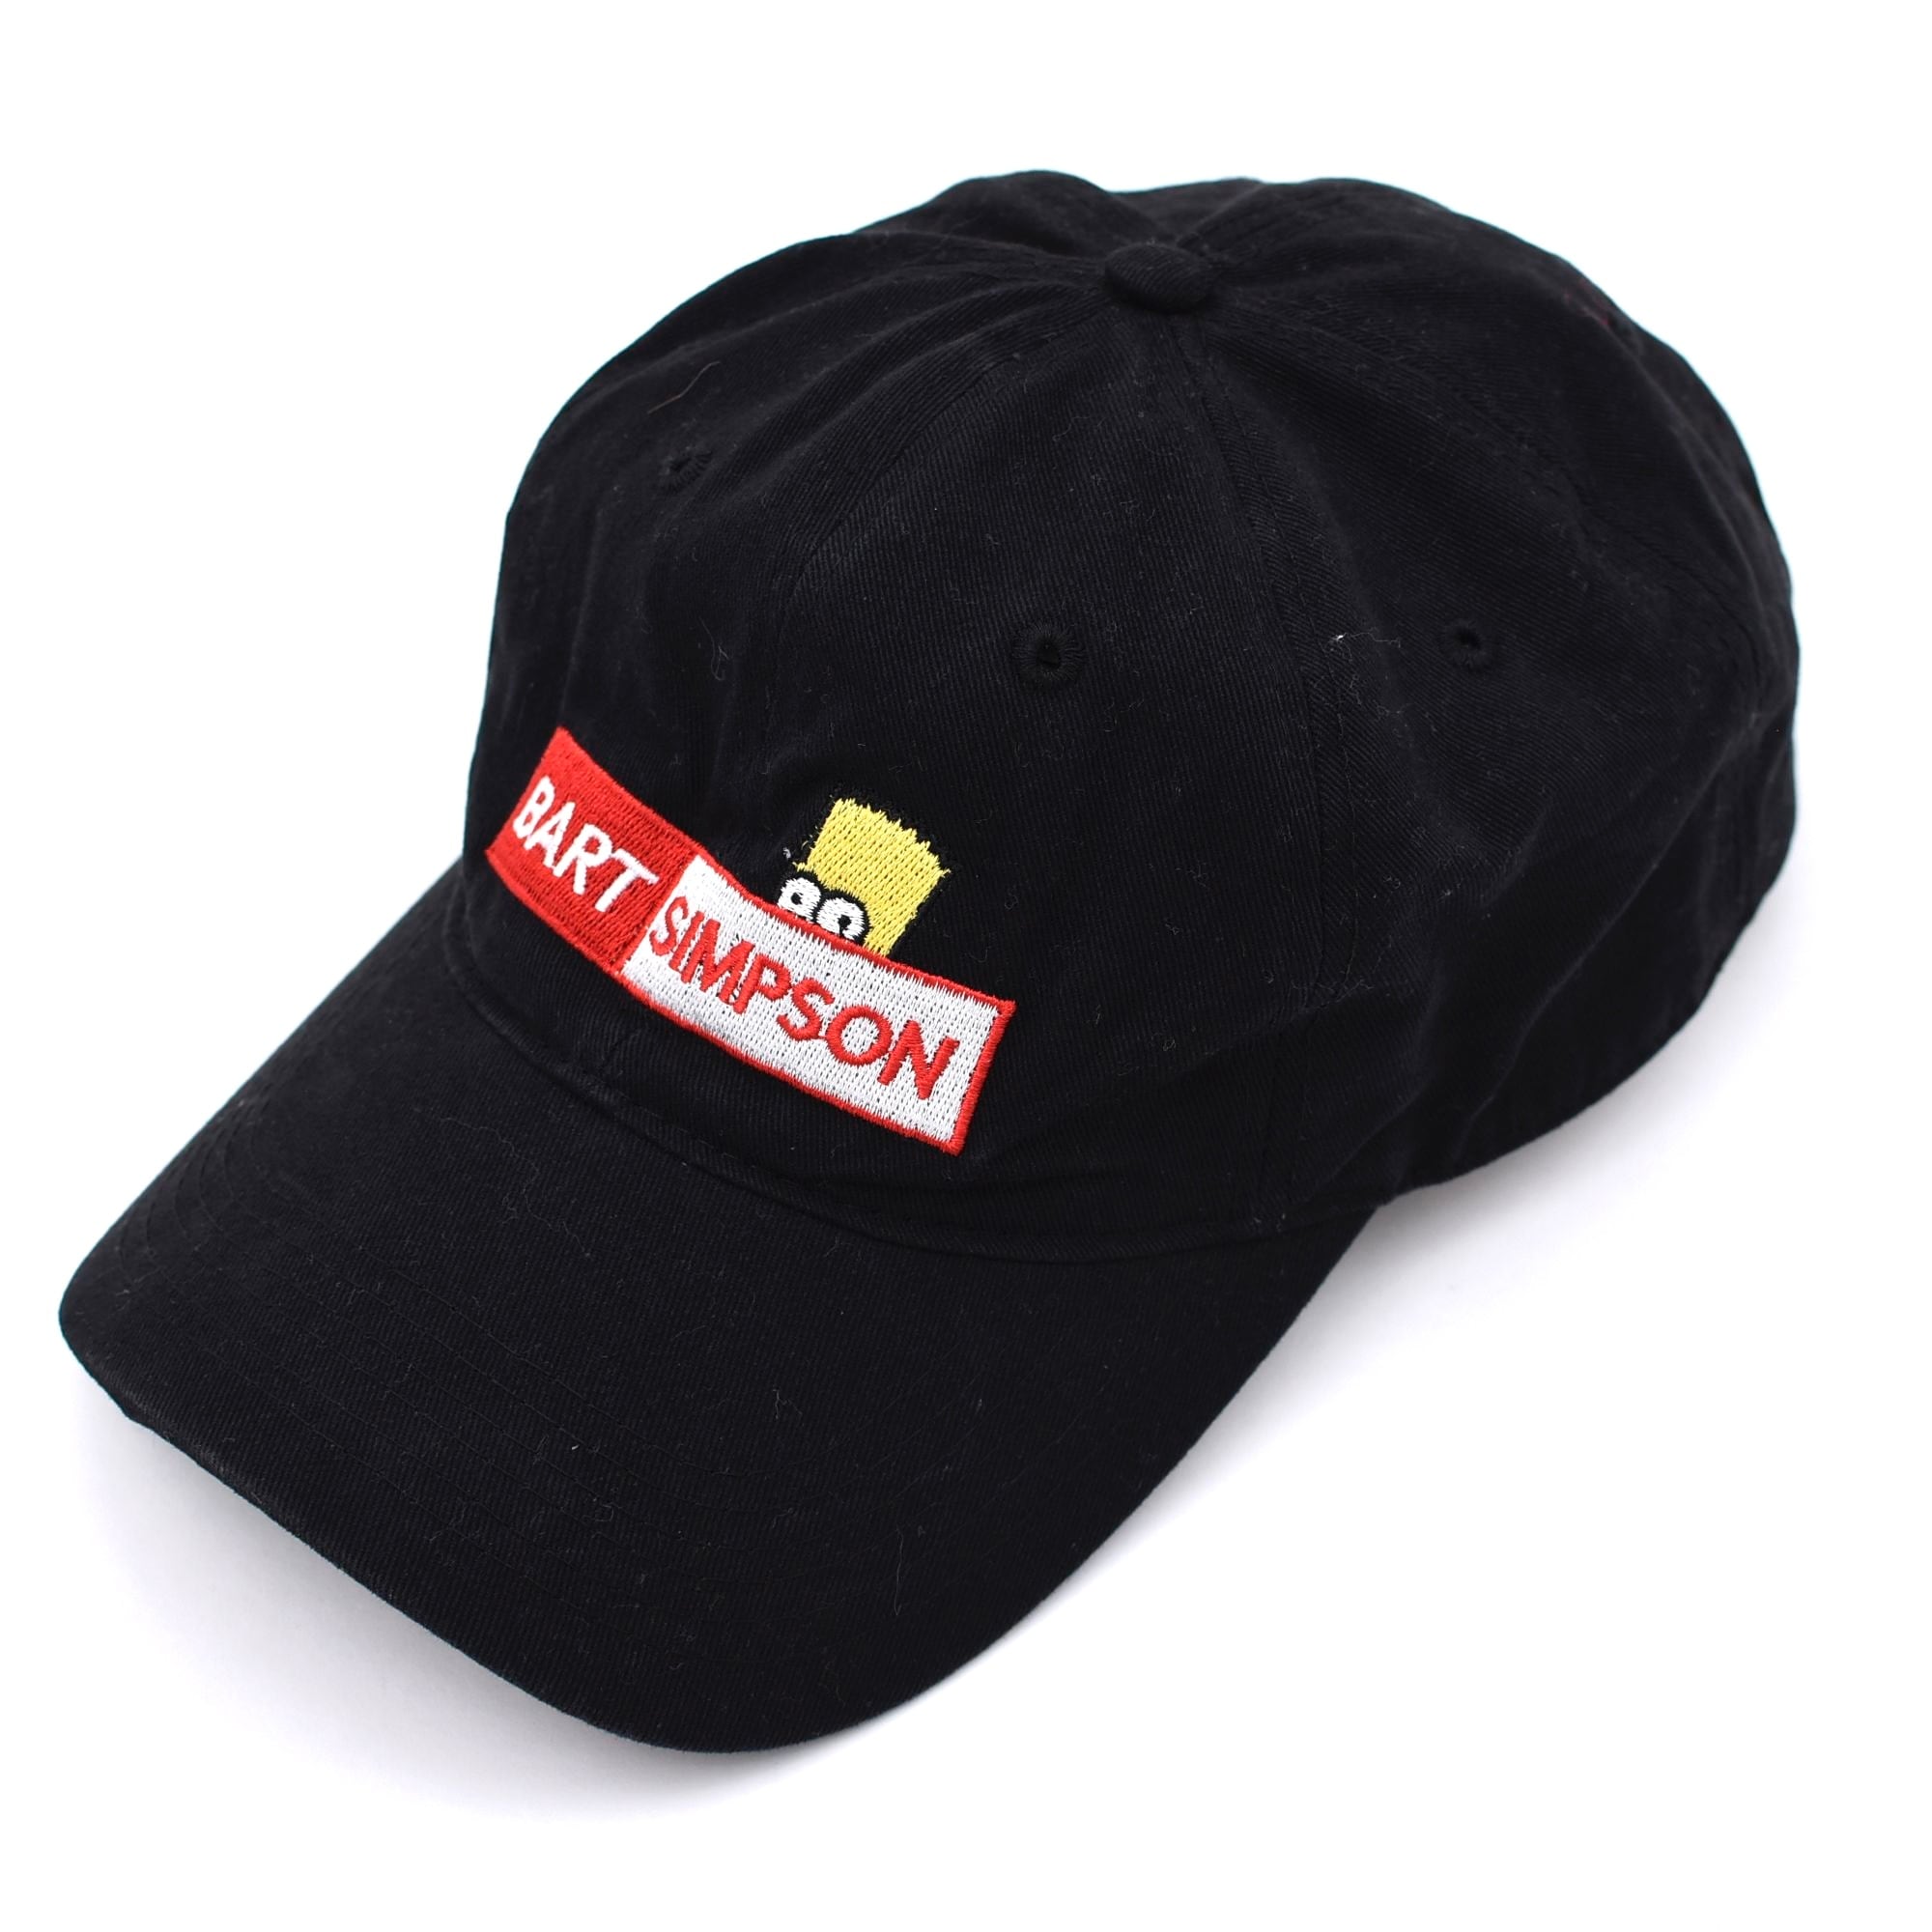 Bart Simpson embroidery 6panel cap